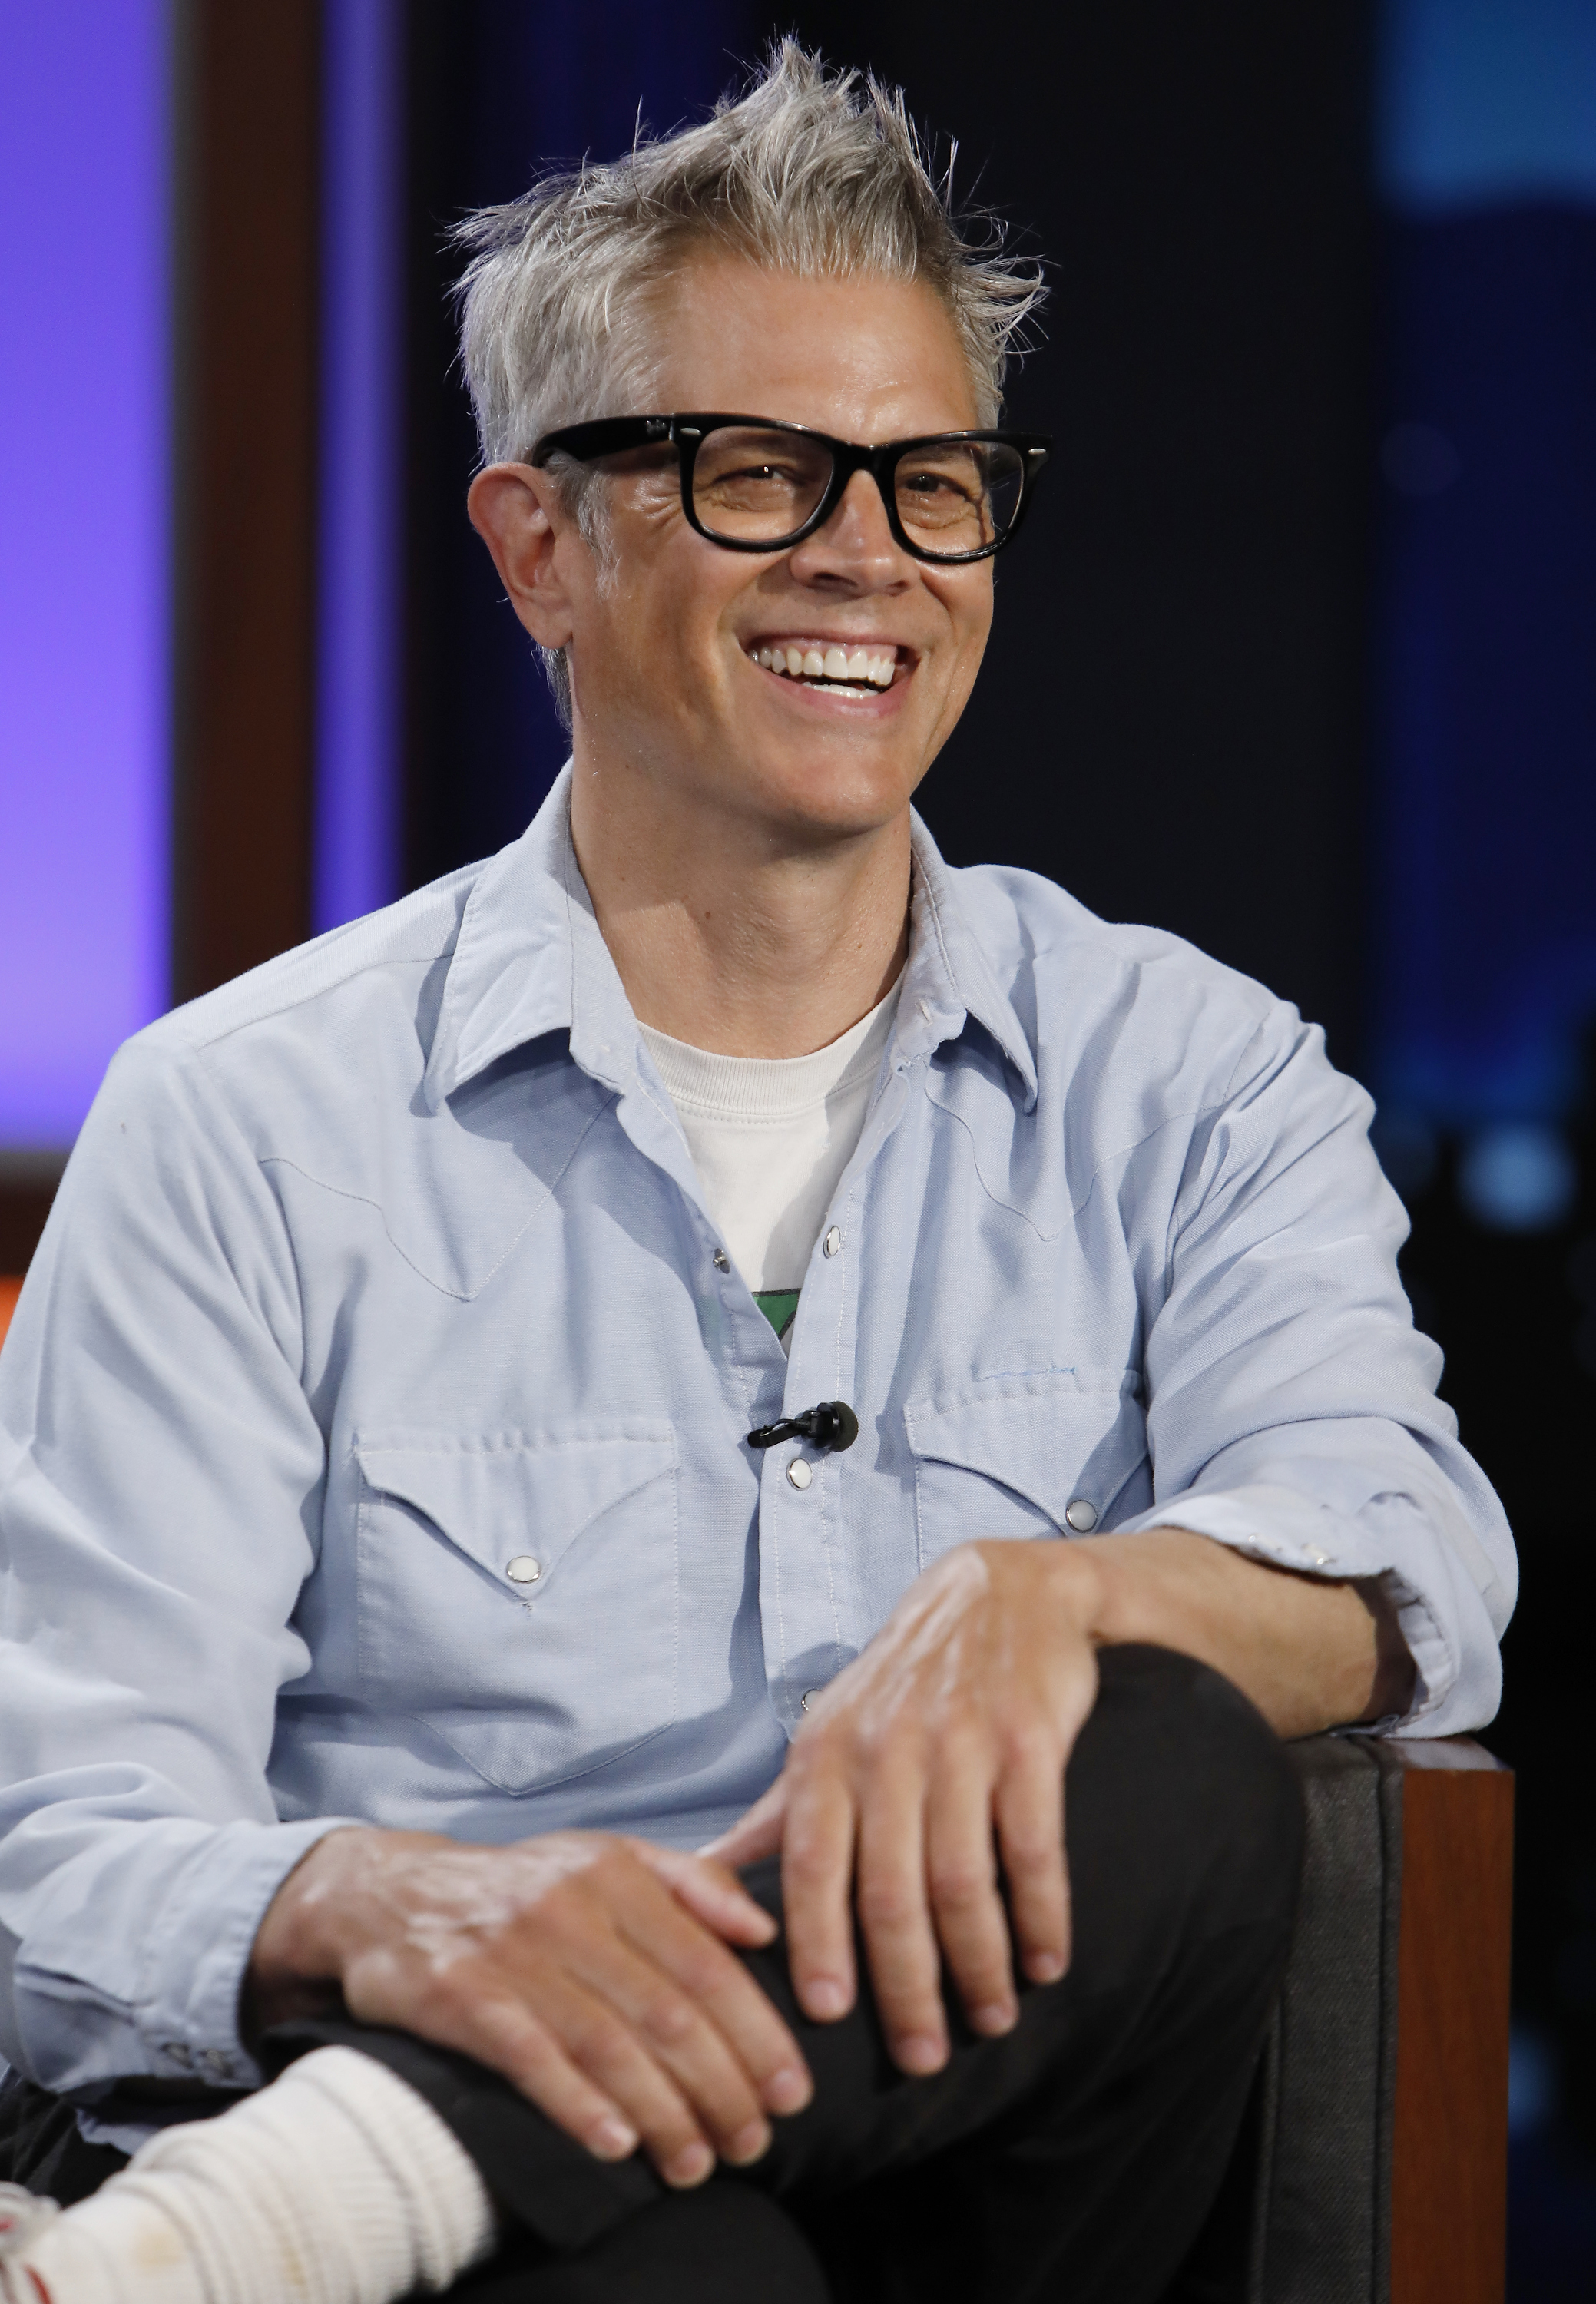 Person with short hair and glasses, smiling, seated in casual attire with layered shirts